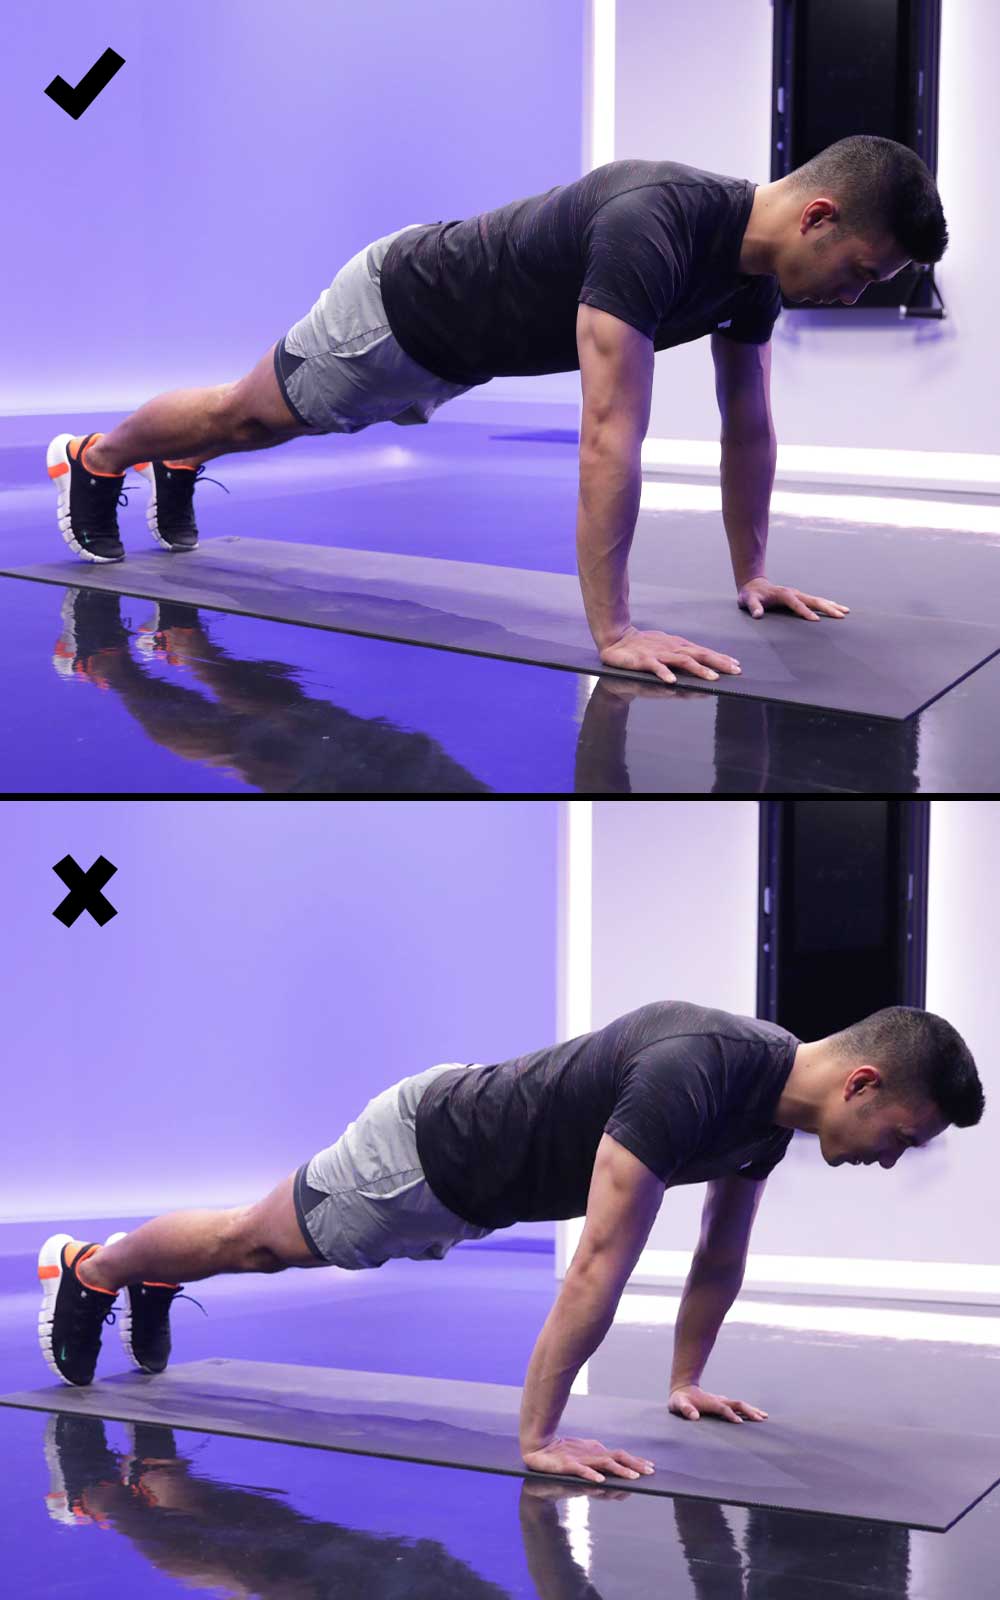 How to Fix Wrist Pain During Pushups